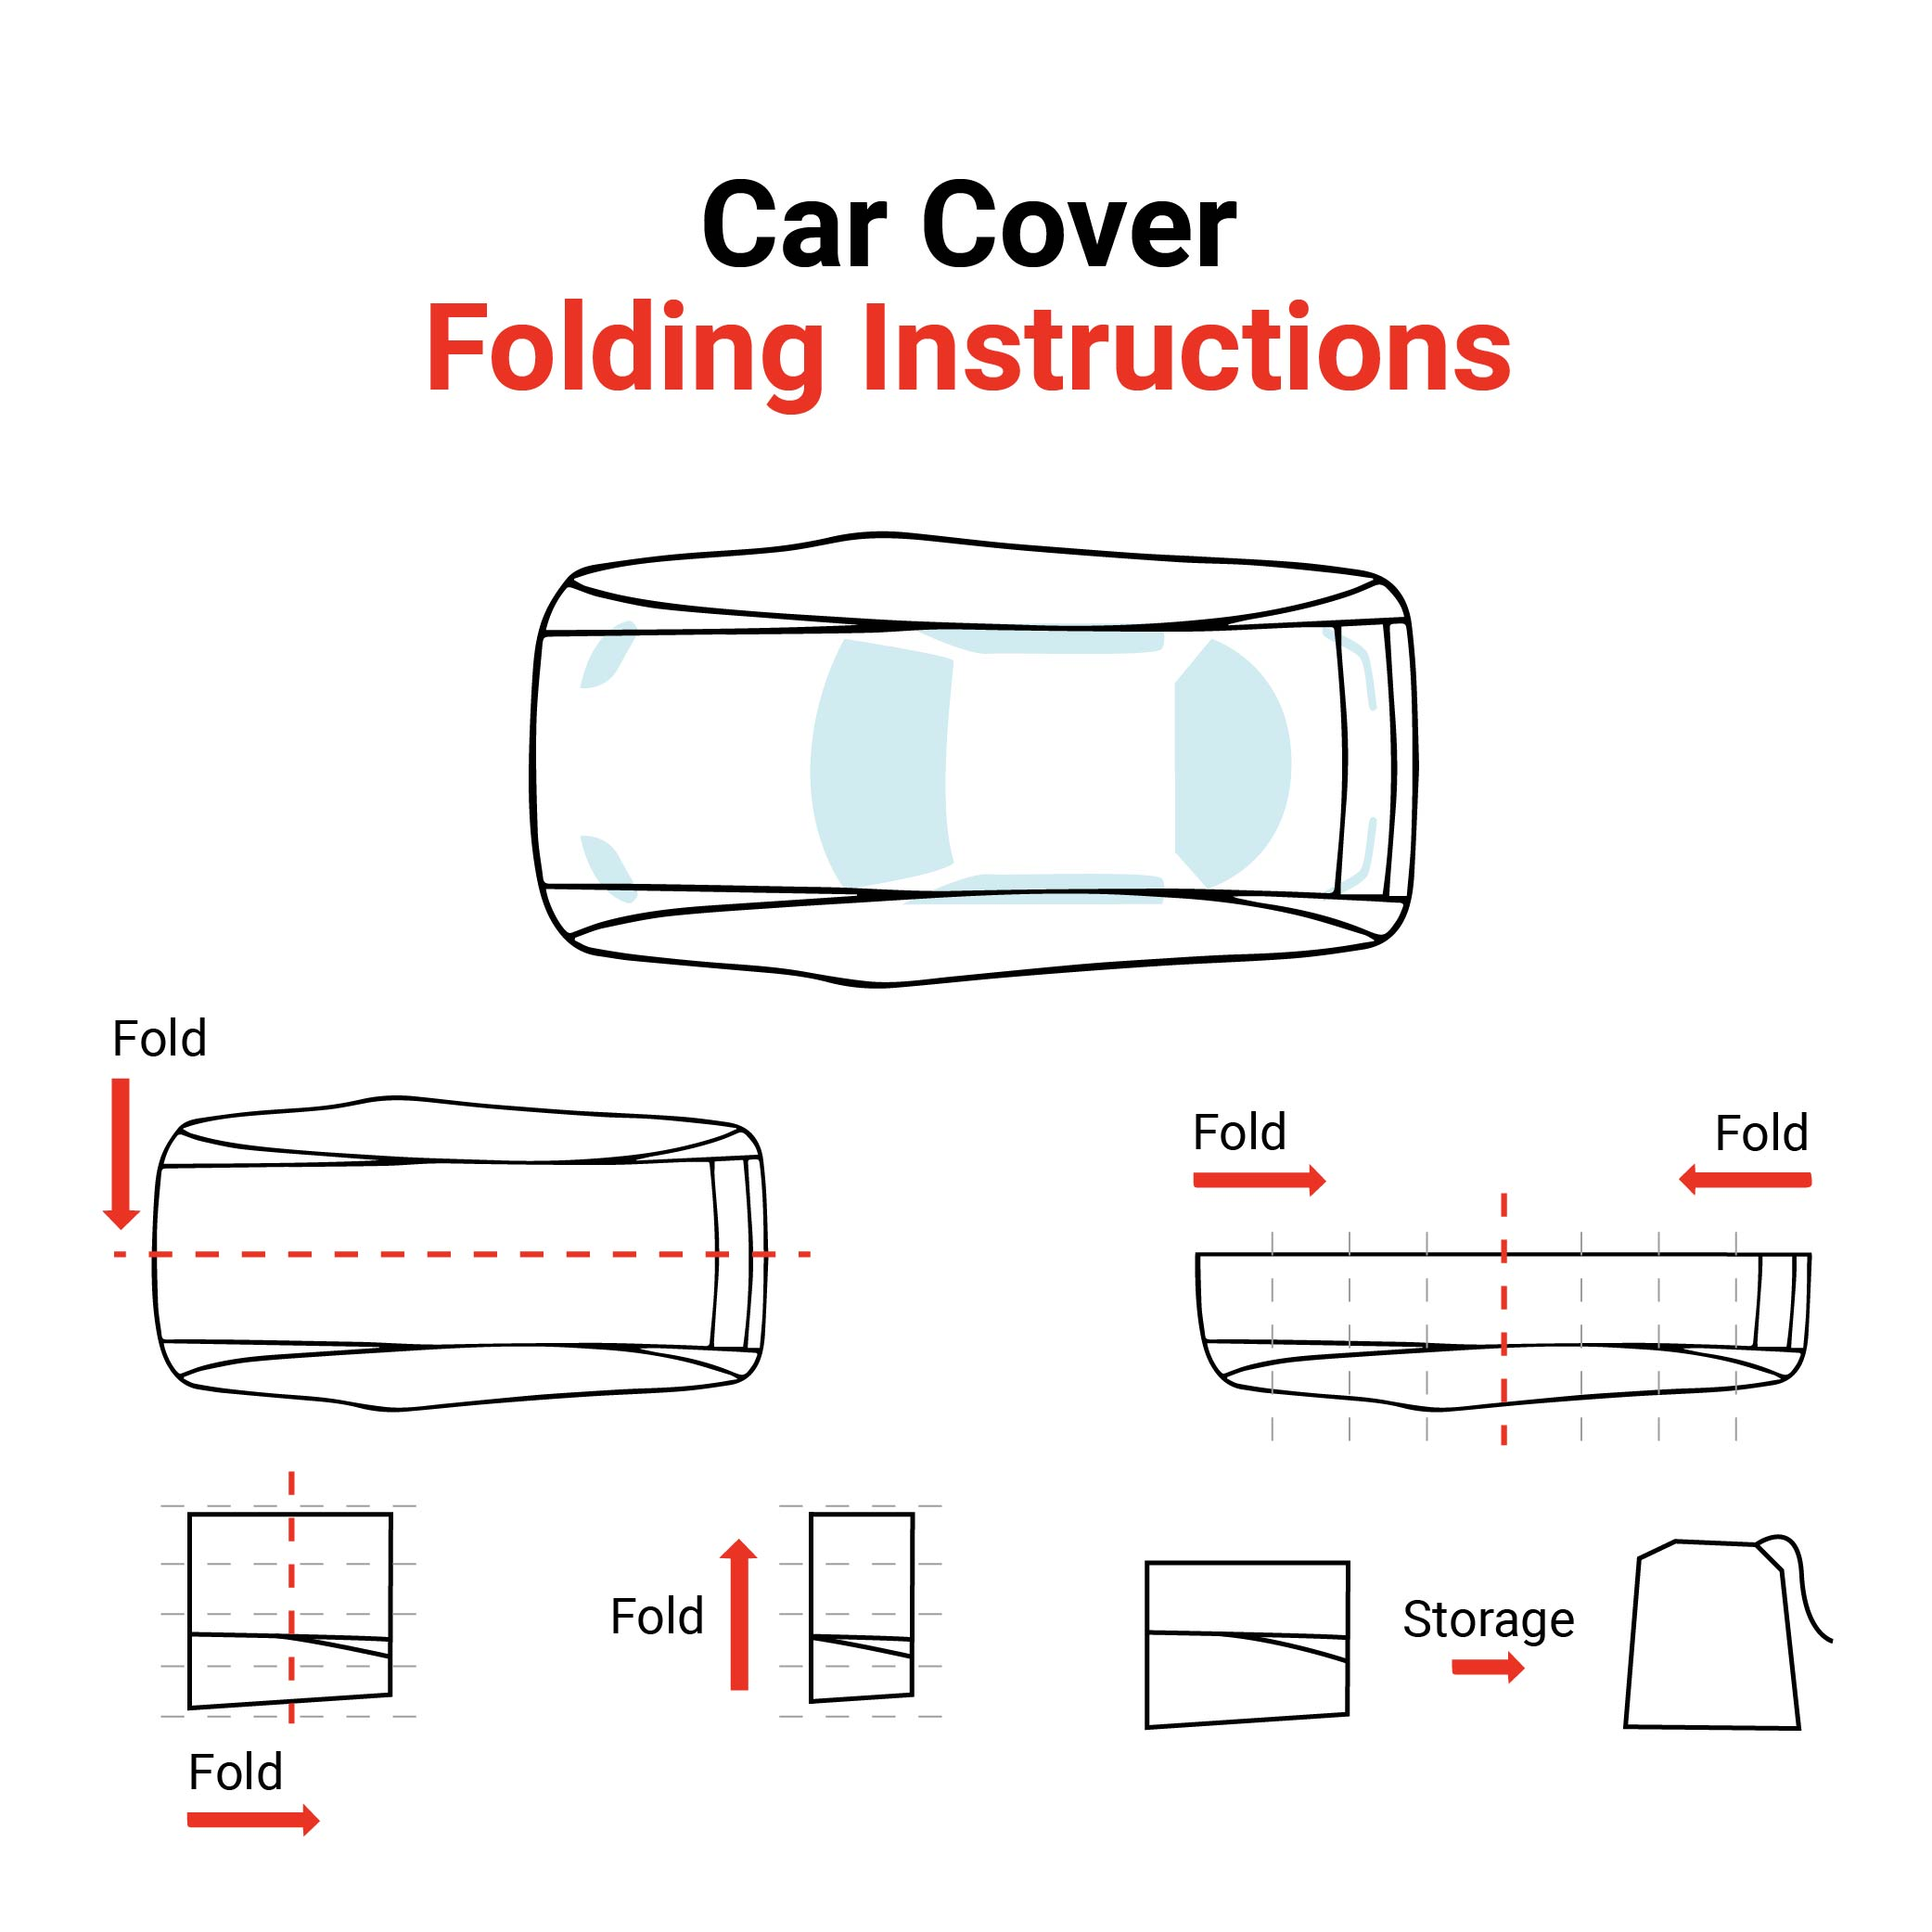 Polco Honda City 5th Gen Car Body Cover With Mirror Pockets, Antenna Cover, and 100% Water Repellent (Dupont Tyvek)